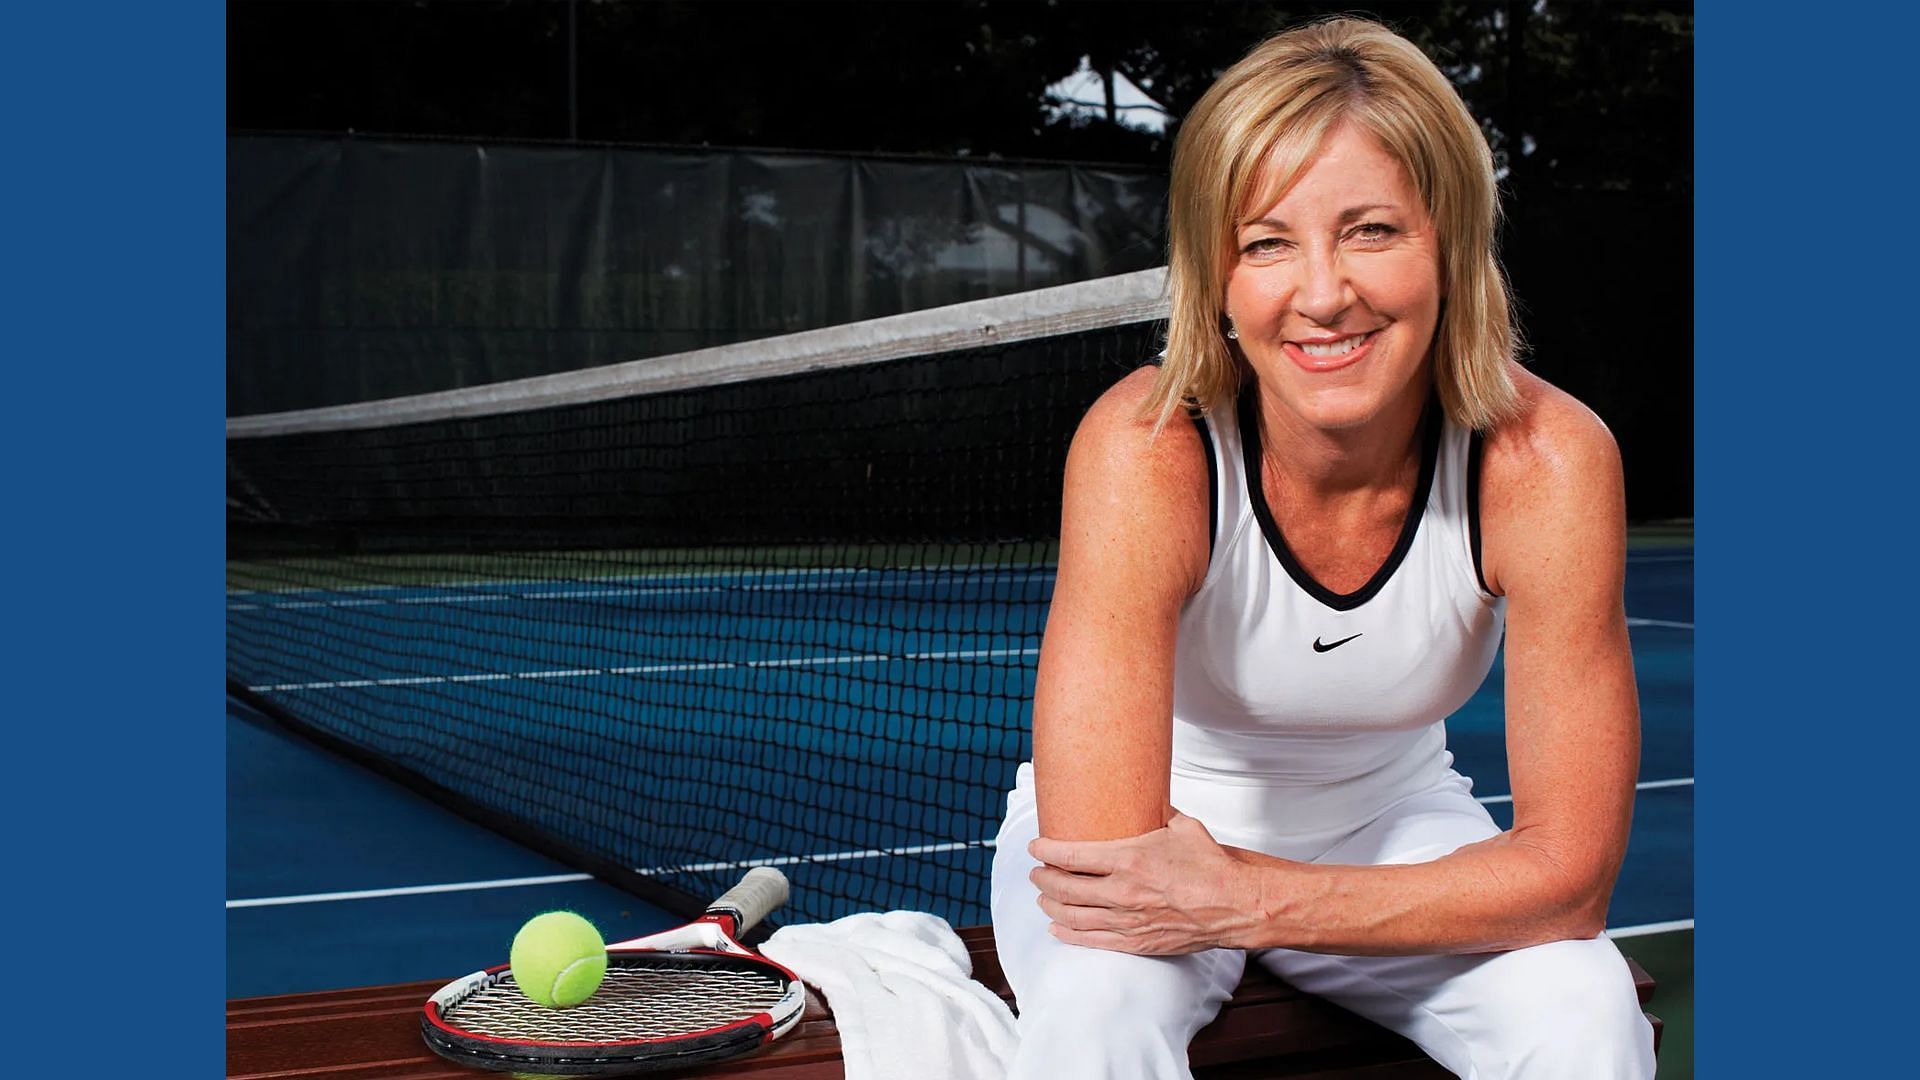 Chris Evernt is an 18-time Grand Slam champion.